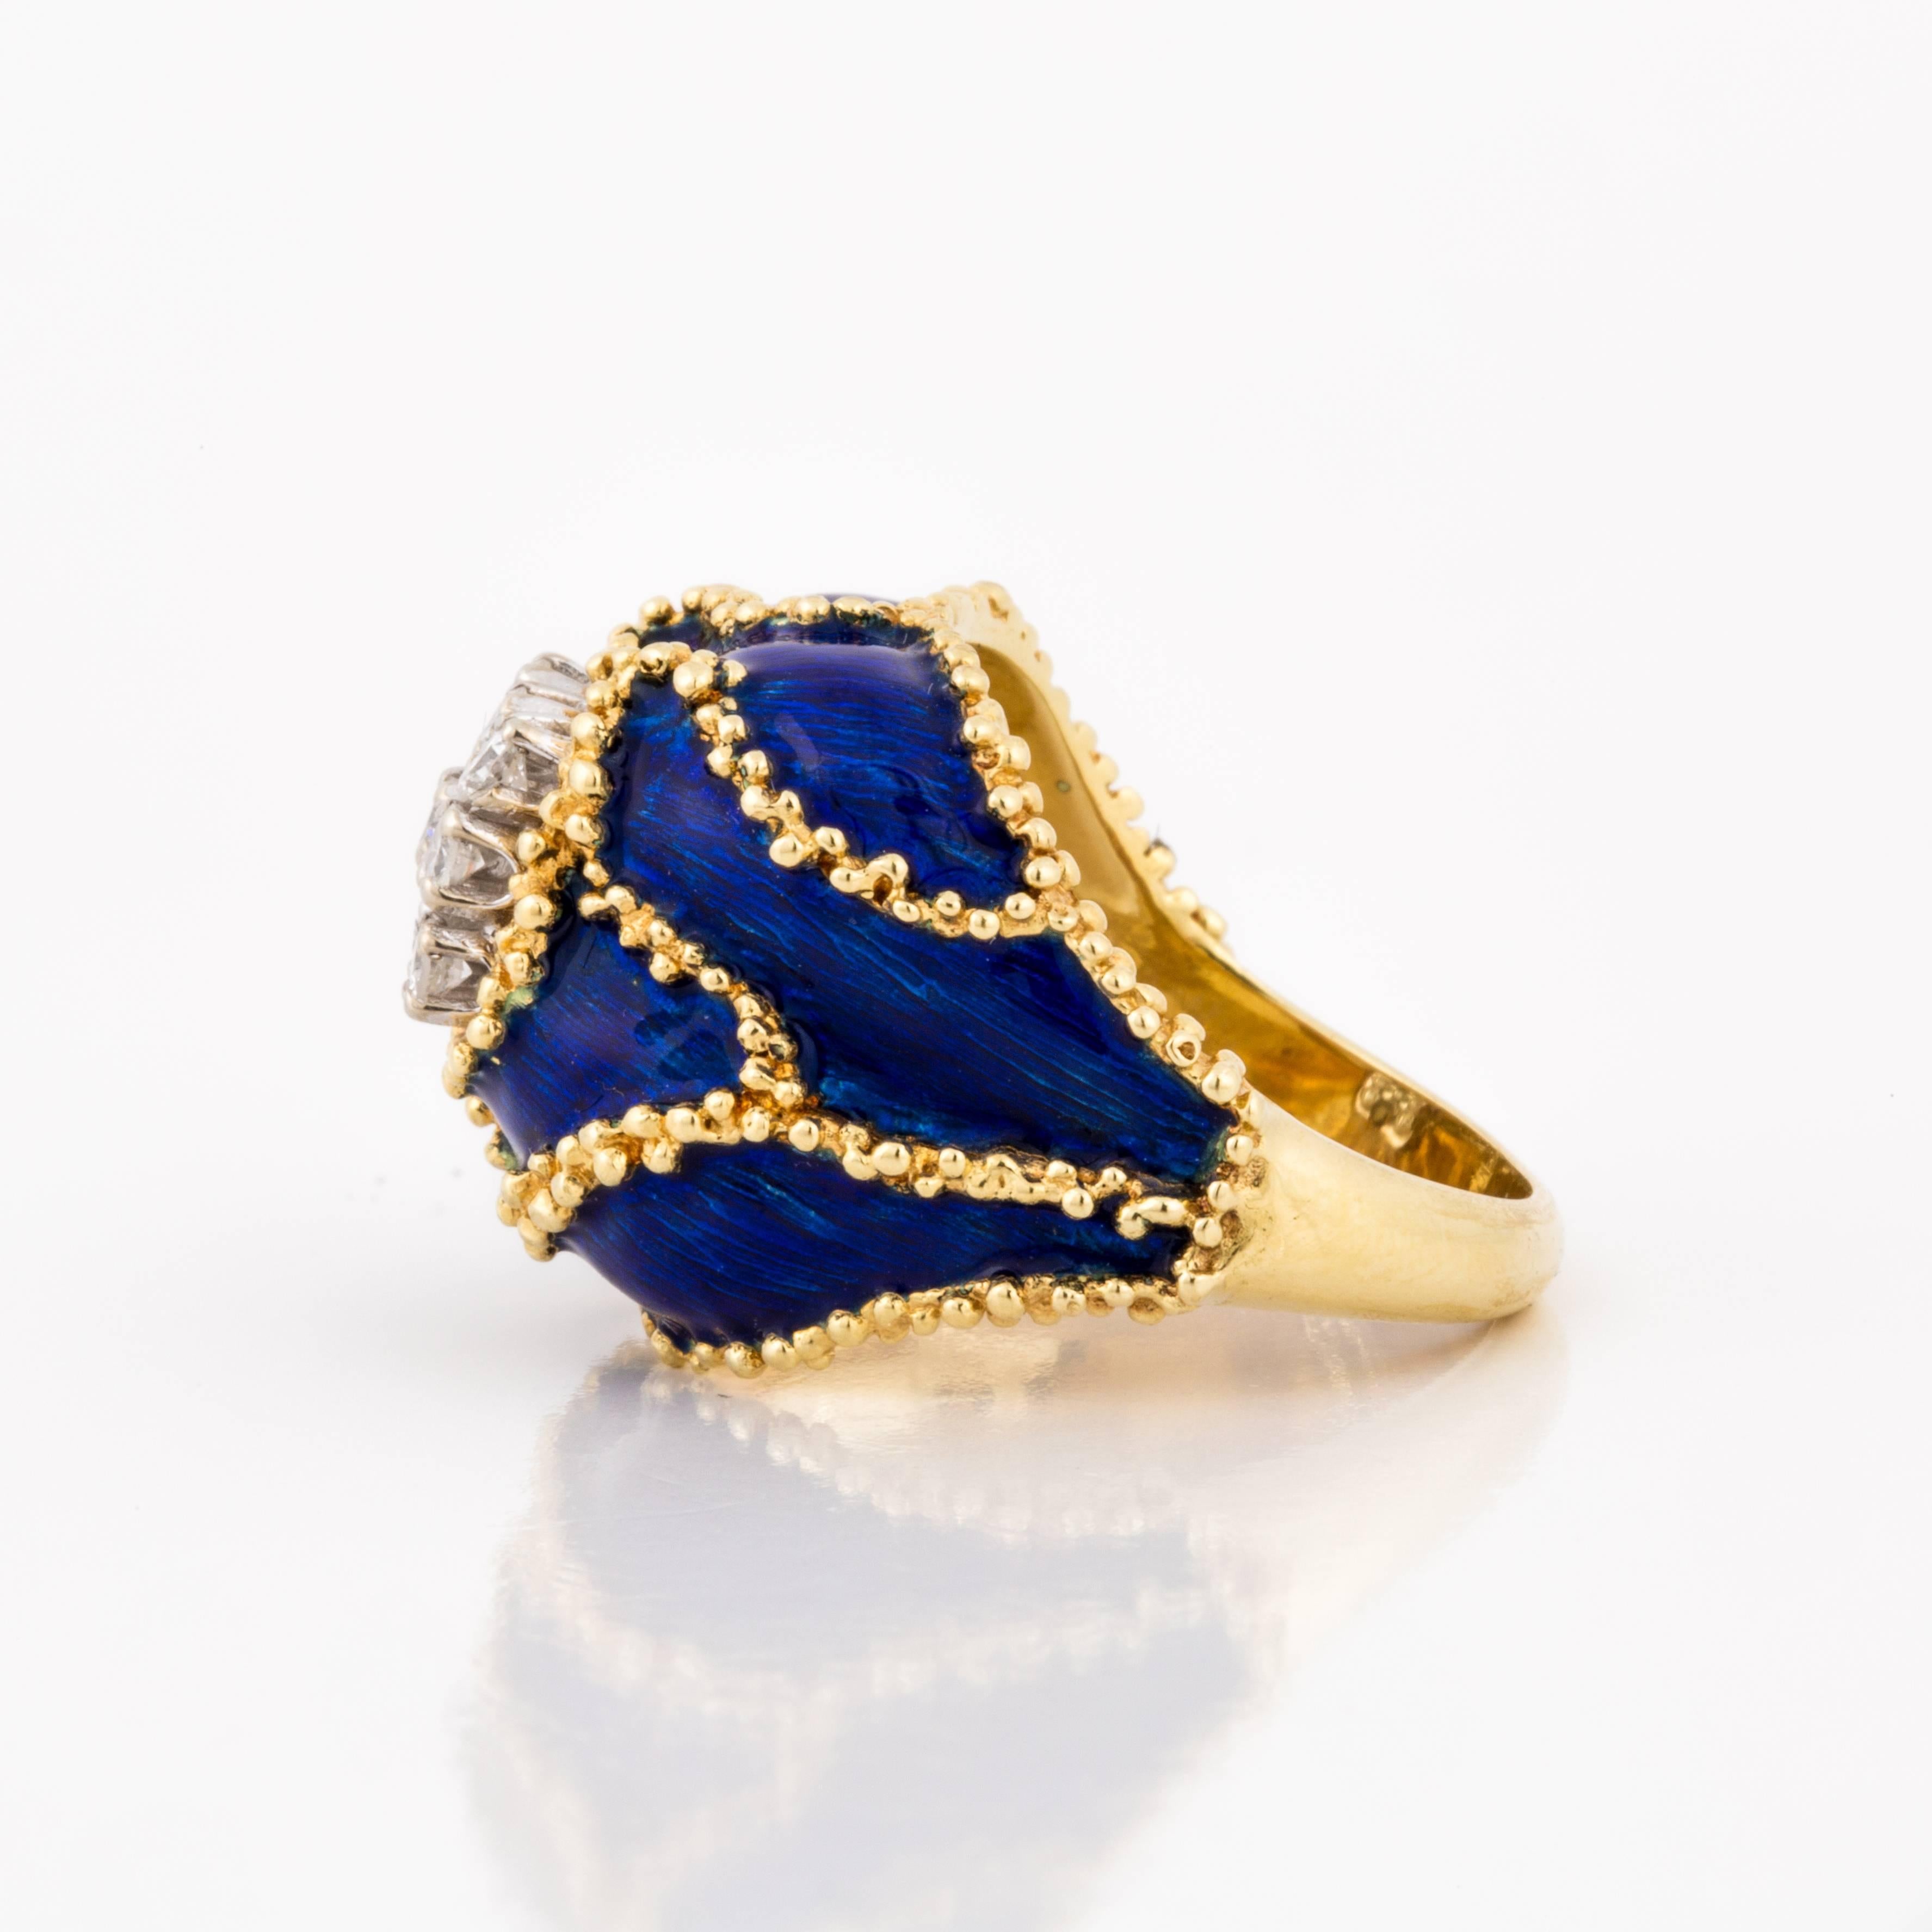 Ring composed of 18K yellow gold with cobalt blue enamel with a twisted rope design running throughout the ring.  There are nine single-cut diamonds centrally set on the top of the ring in a square design.  The round diamonds total 0.35 carats, G-H